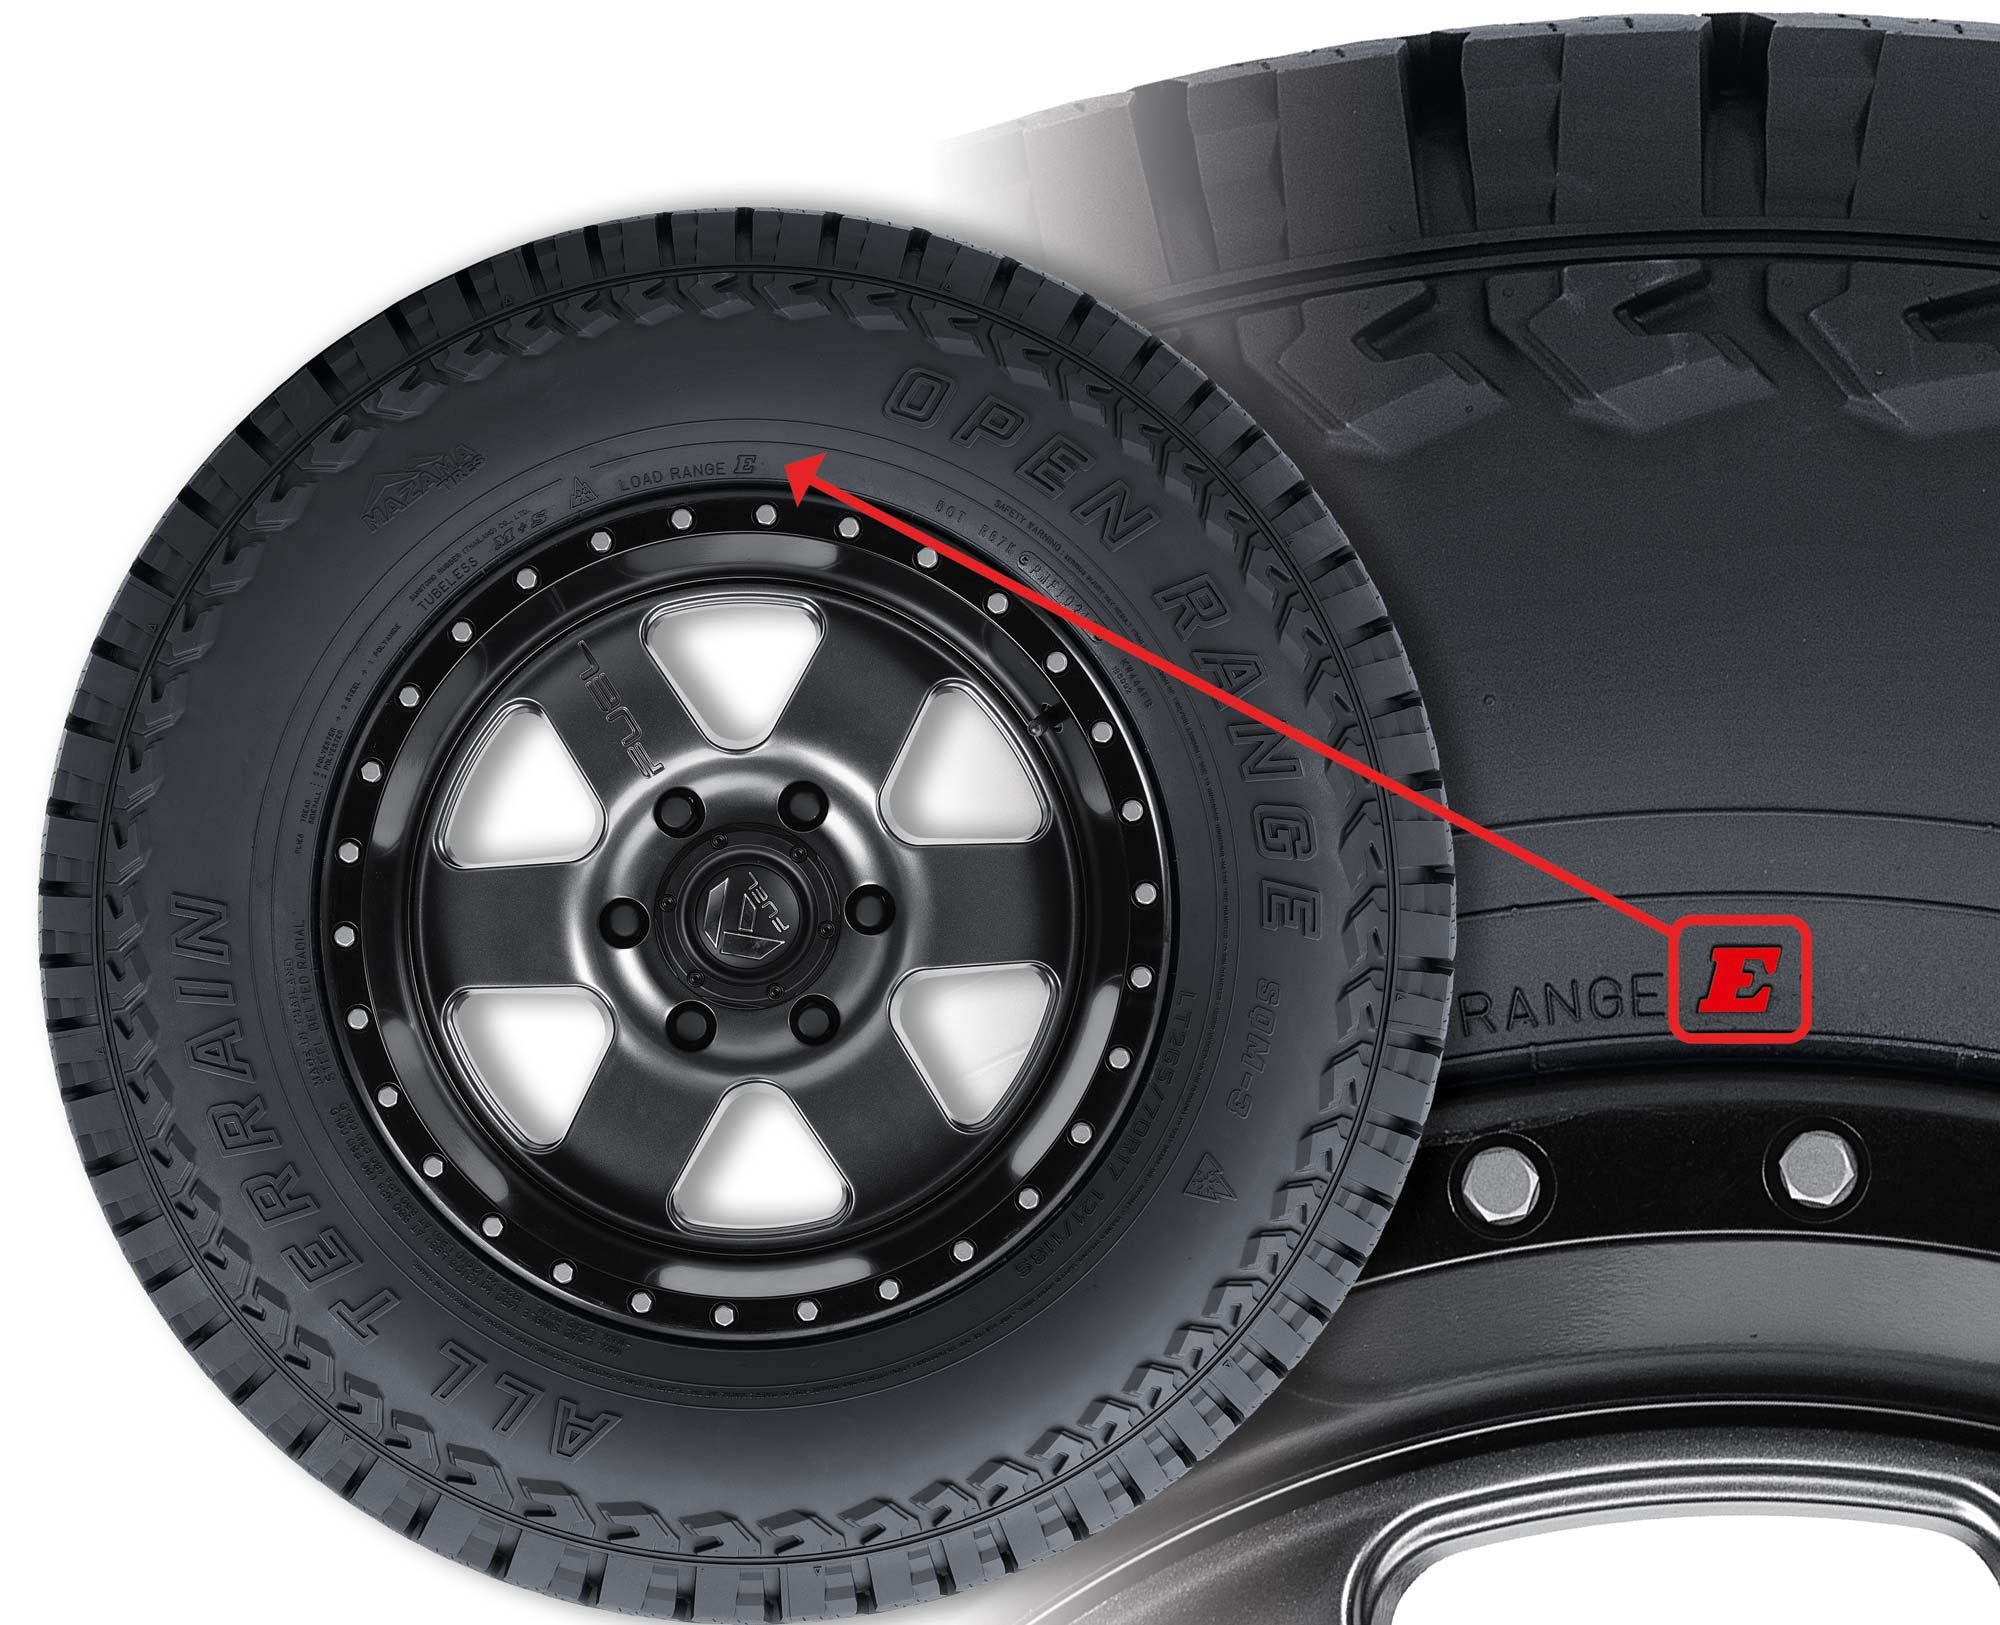 Photo showing where you can find the load range on the side of a tire.